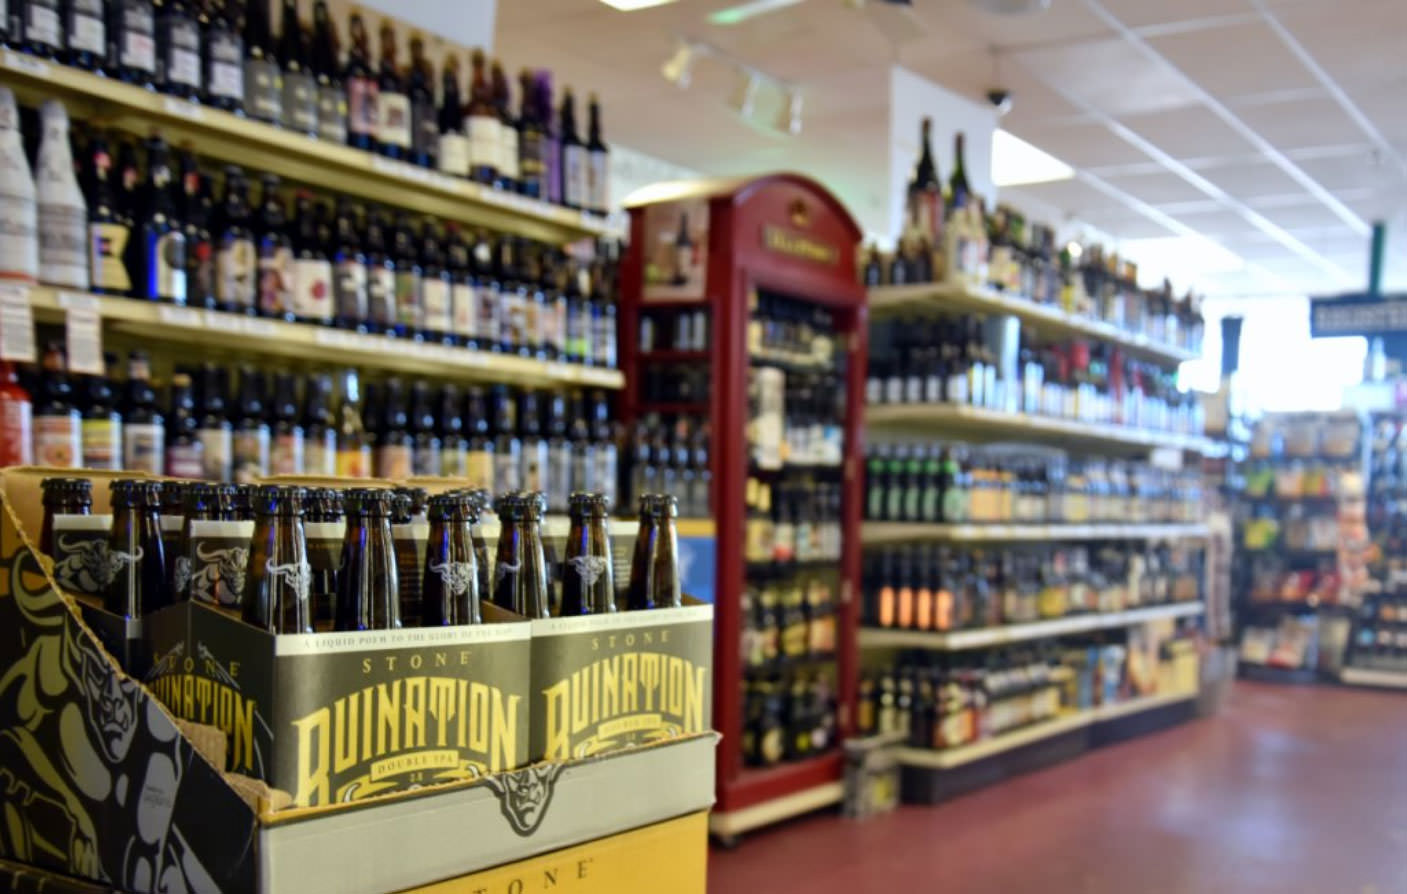 Craft Beer Store Near Me - All About Craft